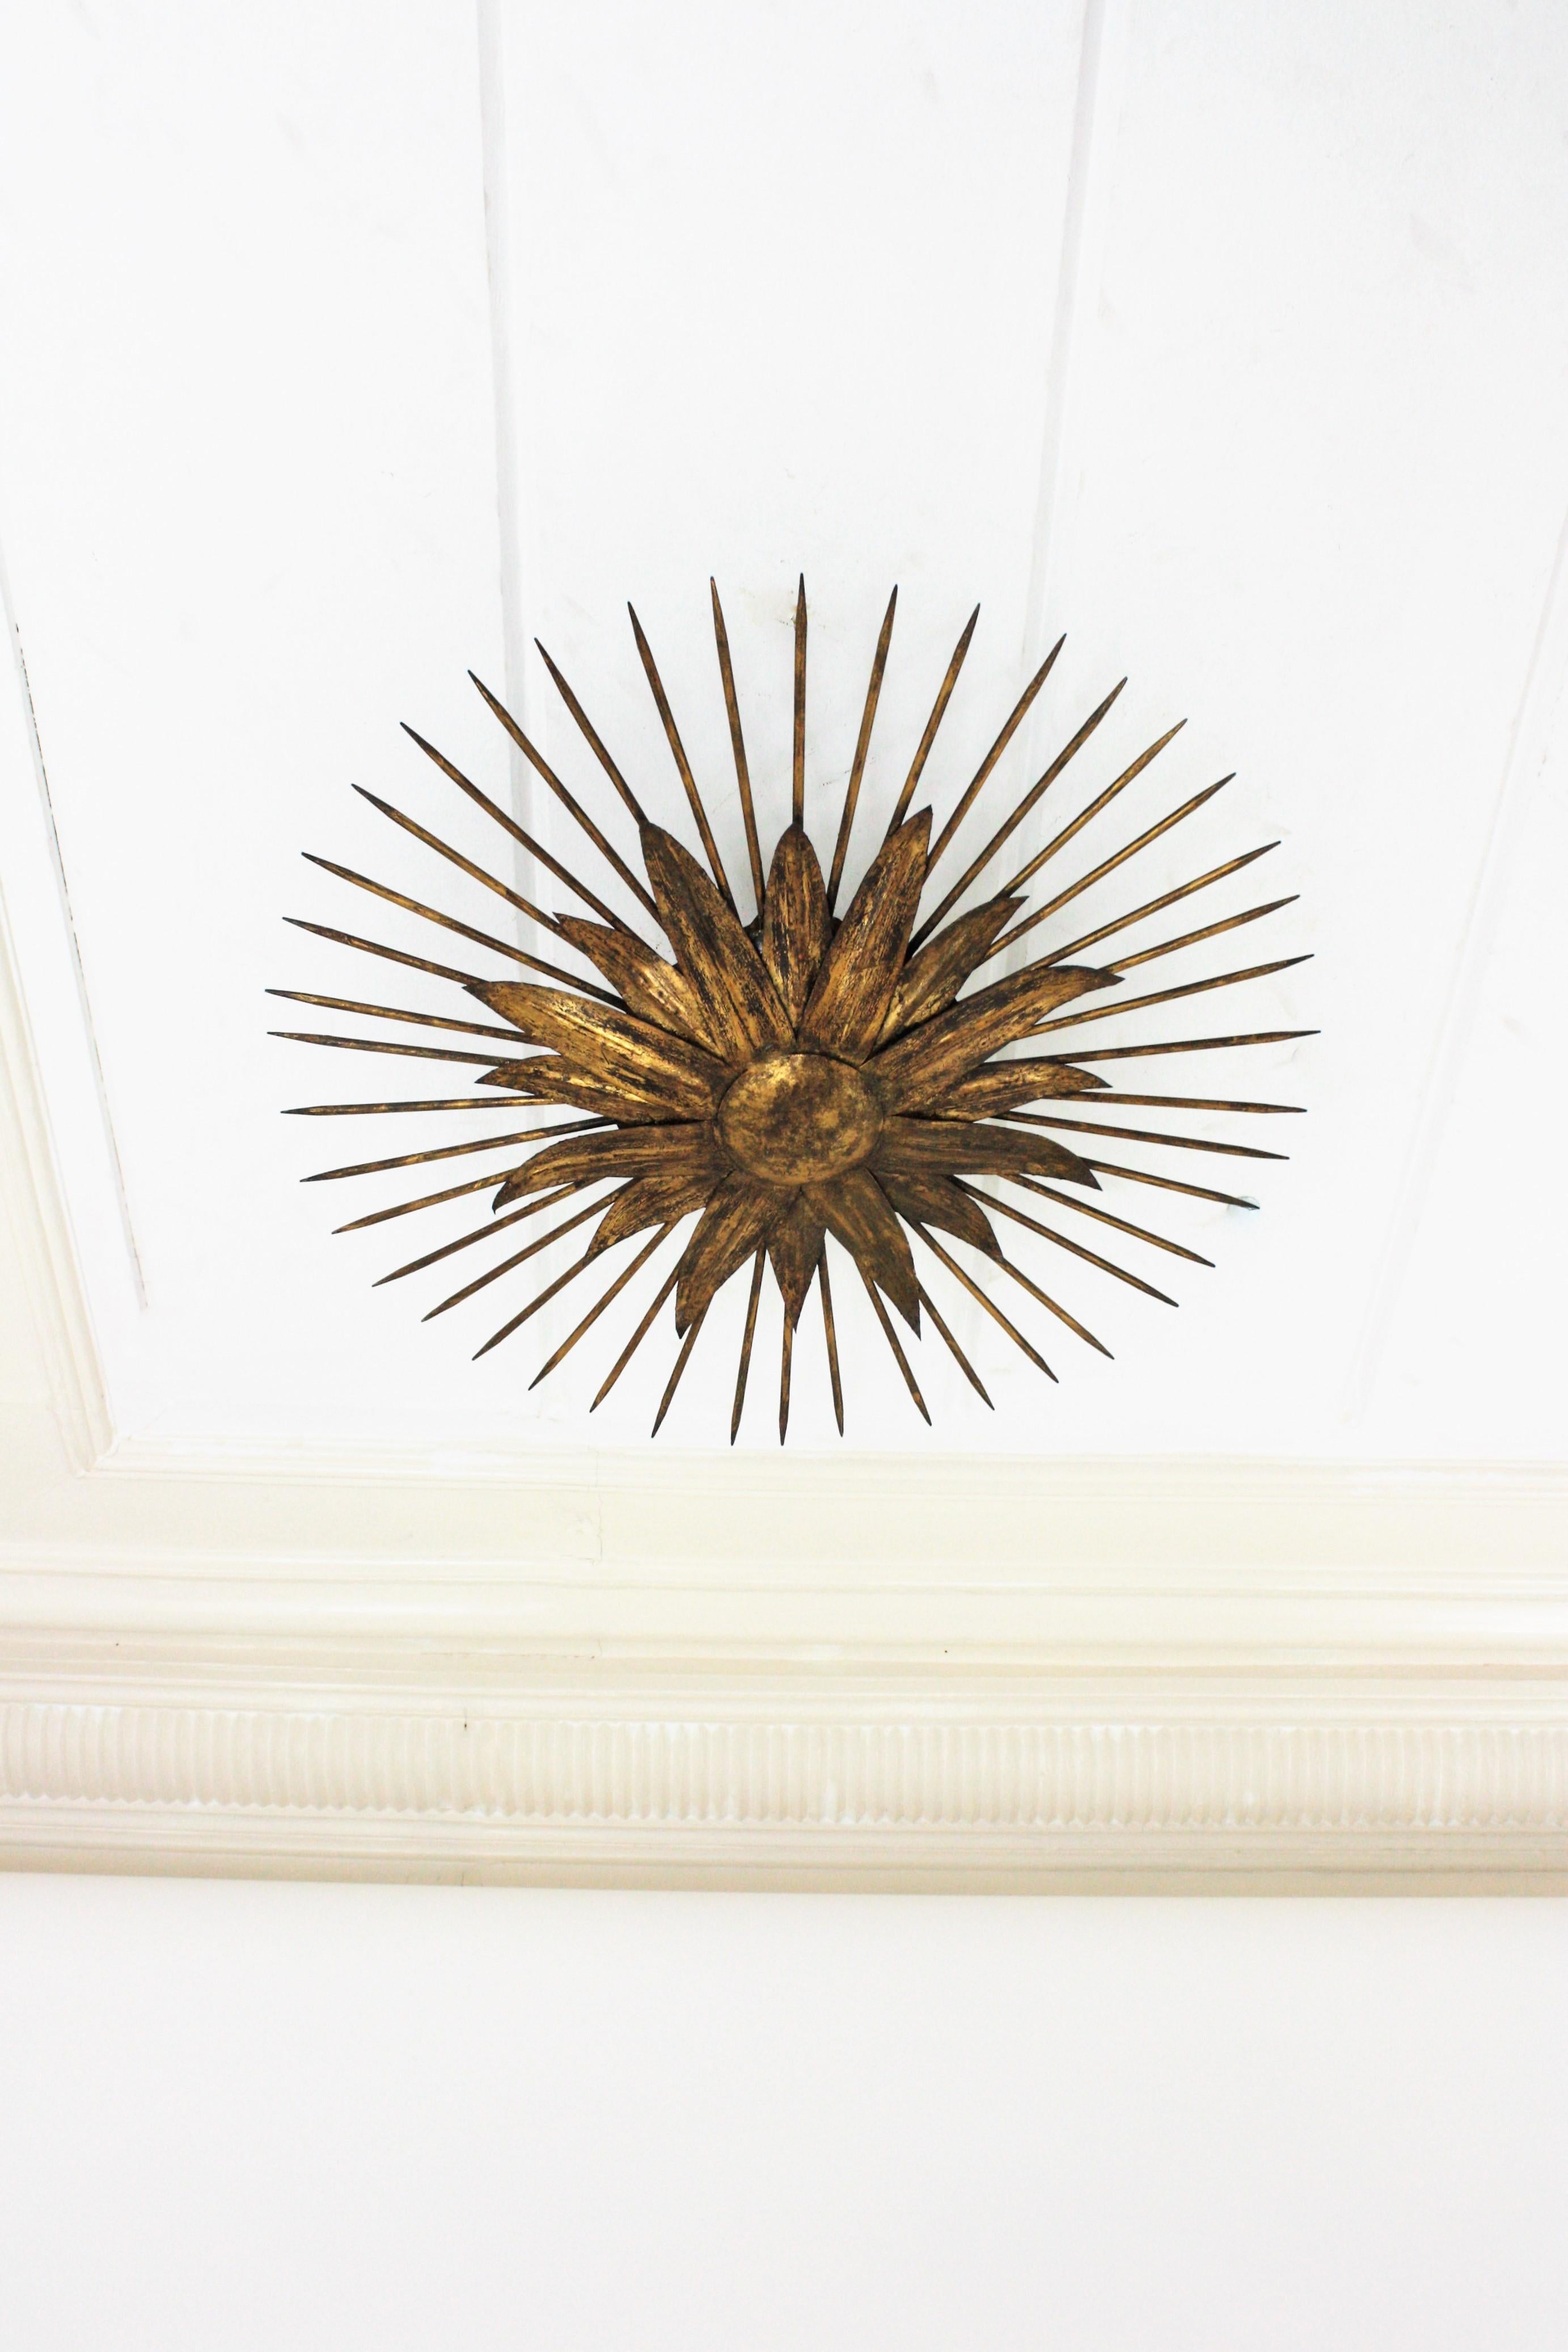 20th Century French Sunburst Light Fixture in Gilt Iron with Nail Detail, 1940s For Sale